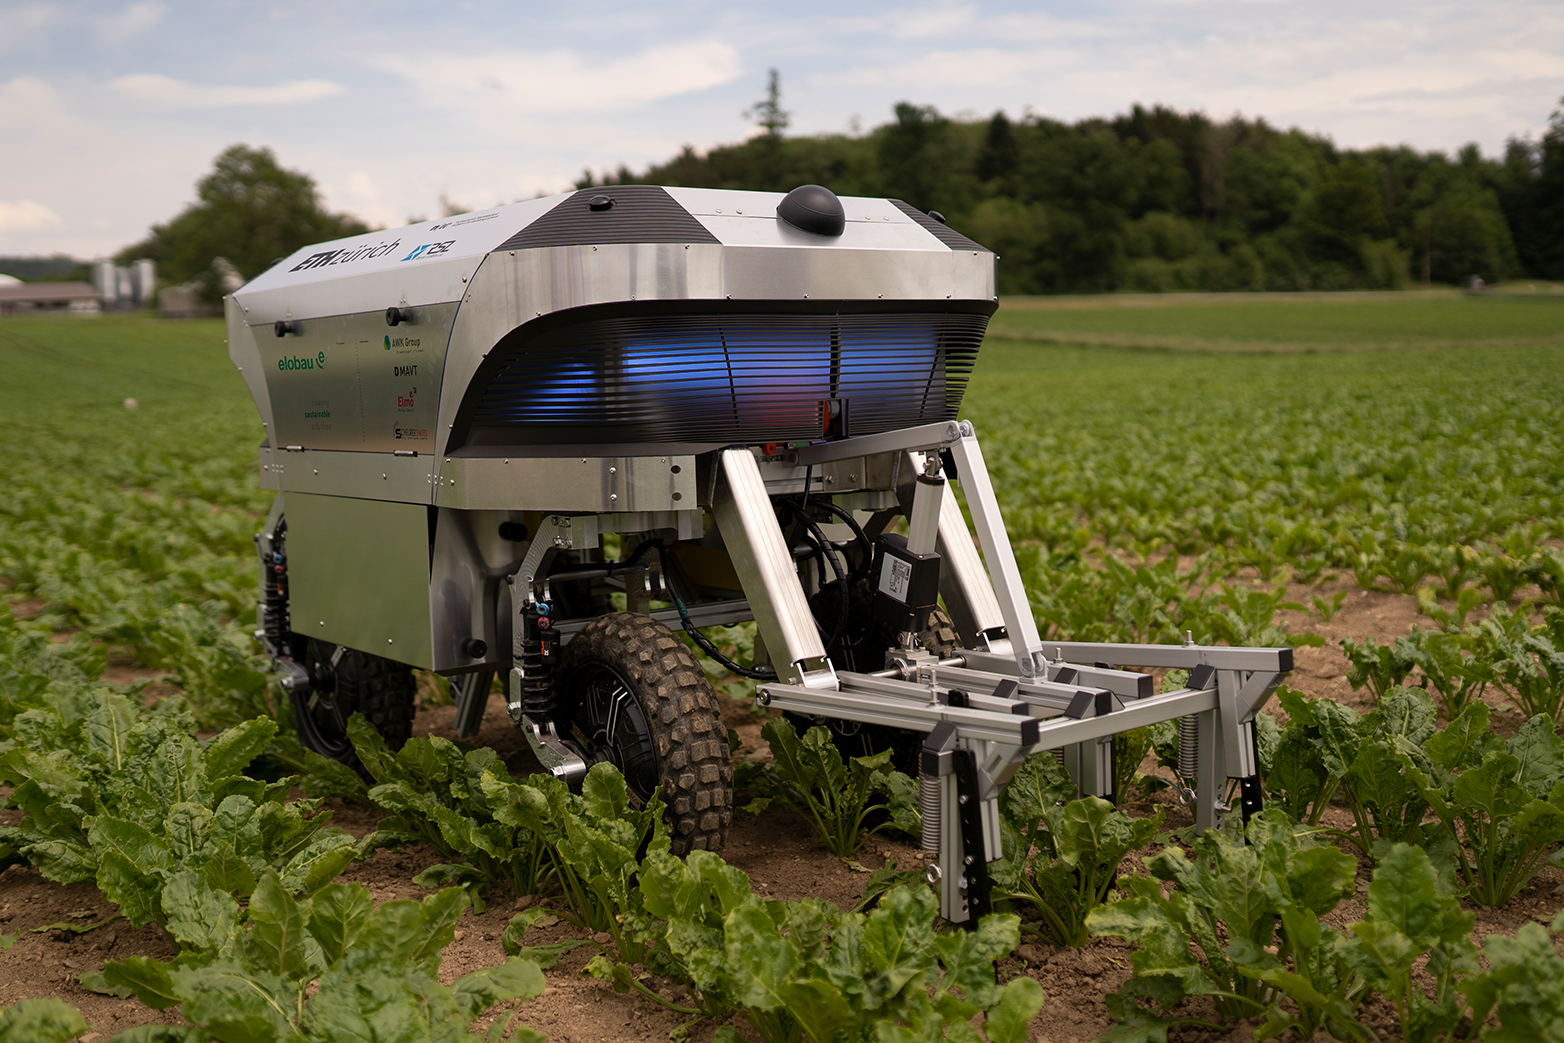 Weeding robot "Rowesys"